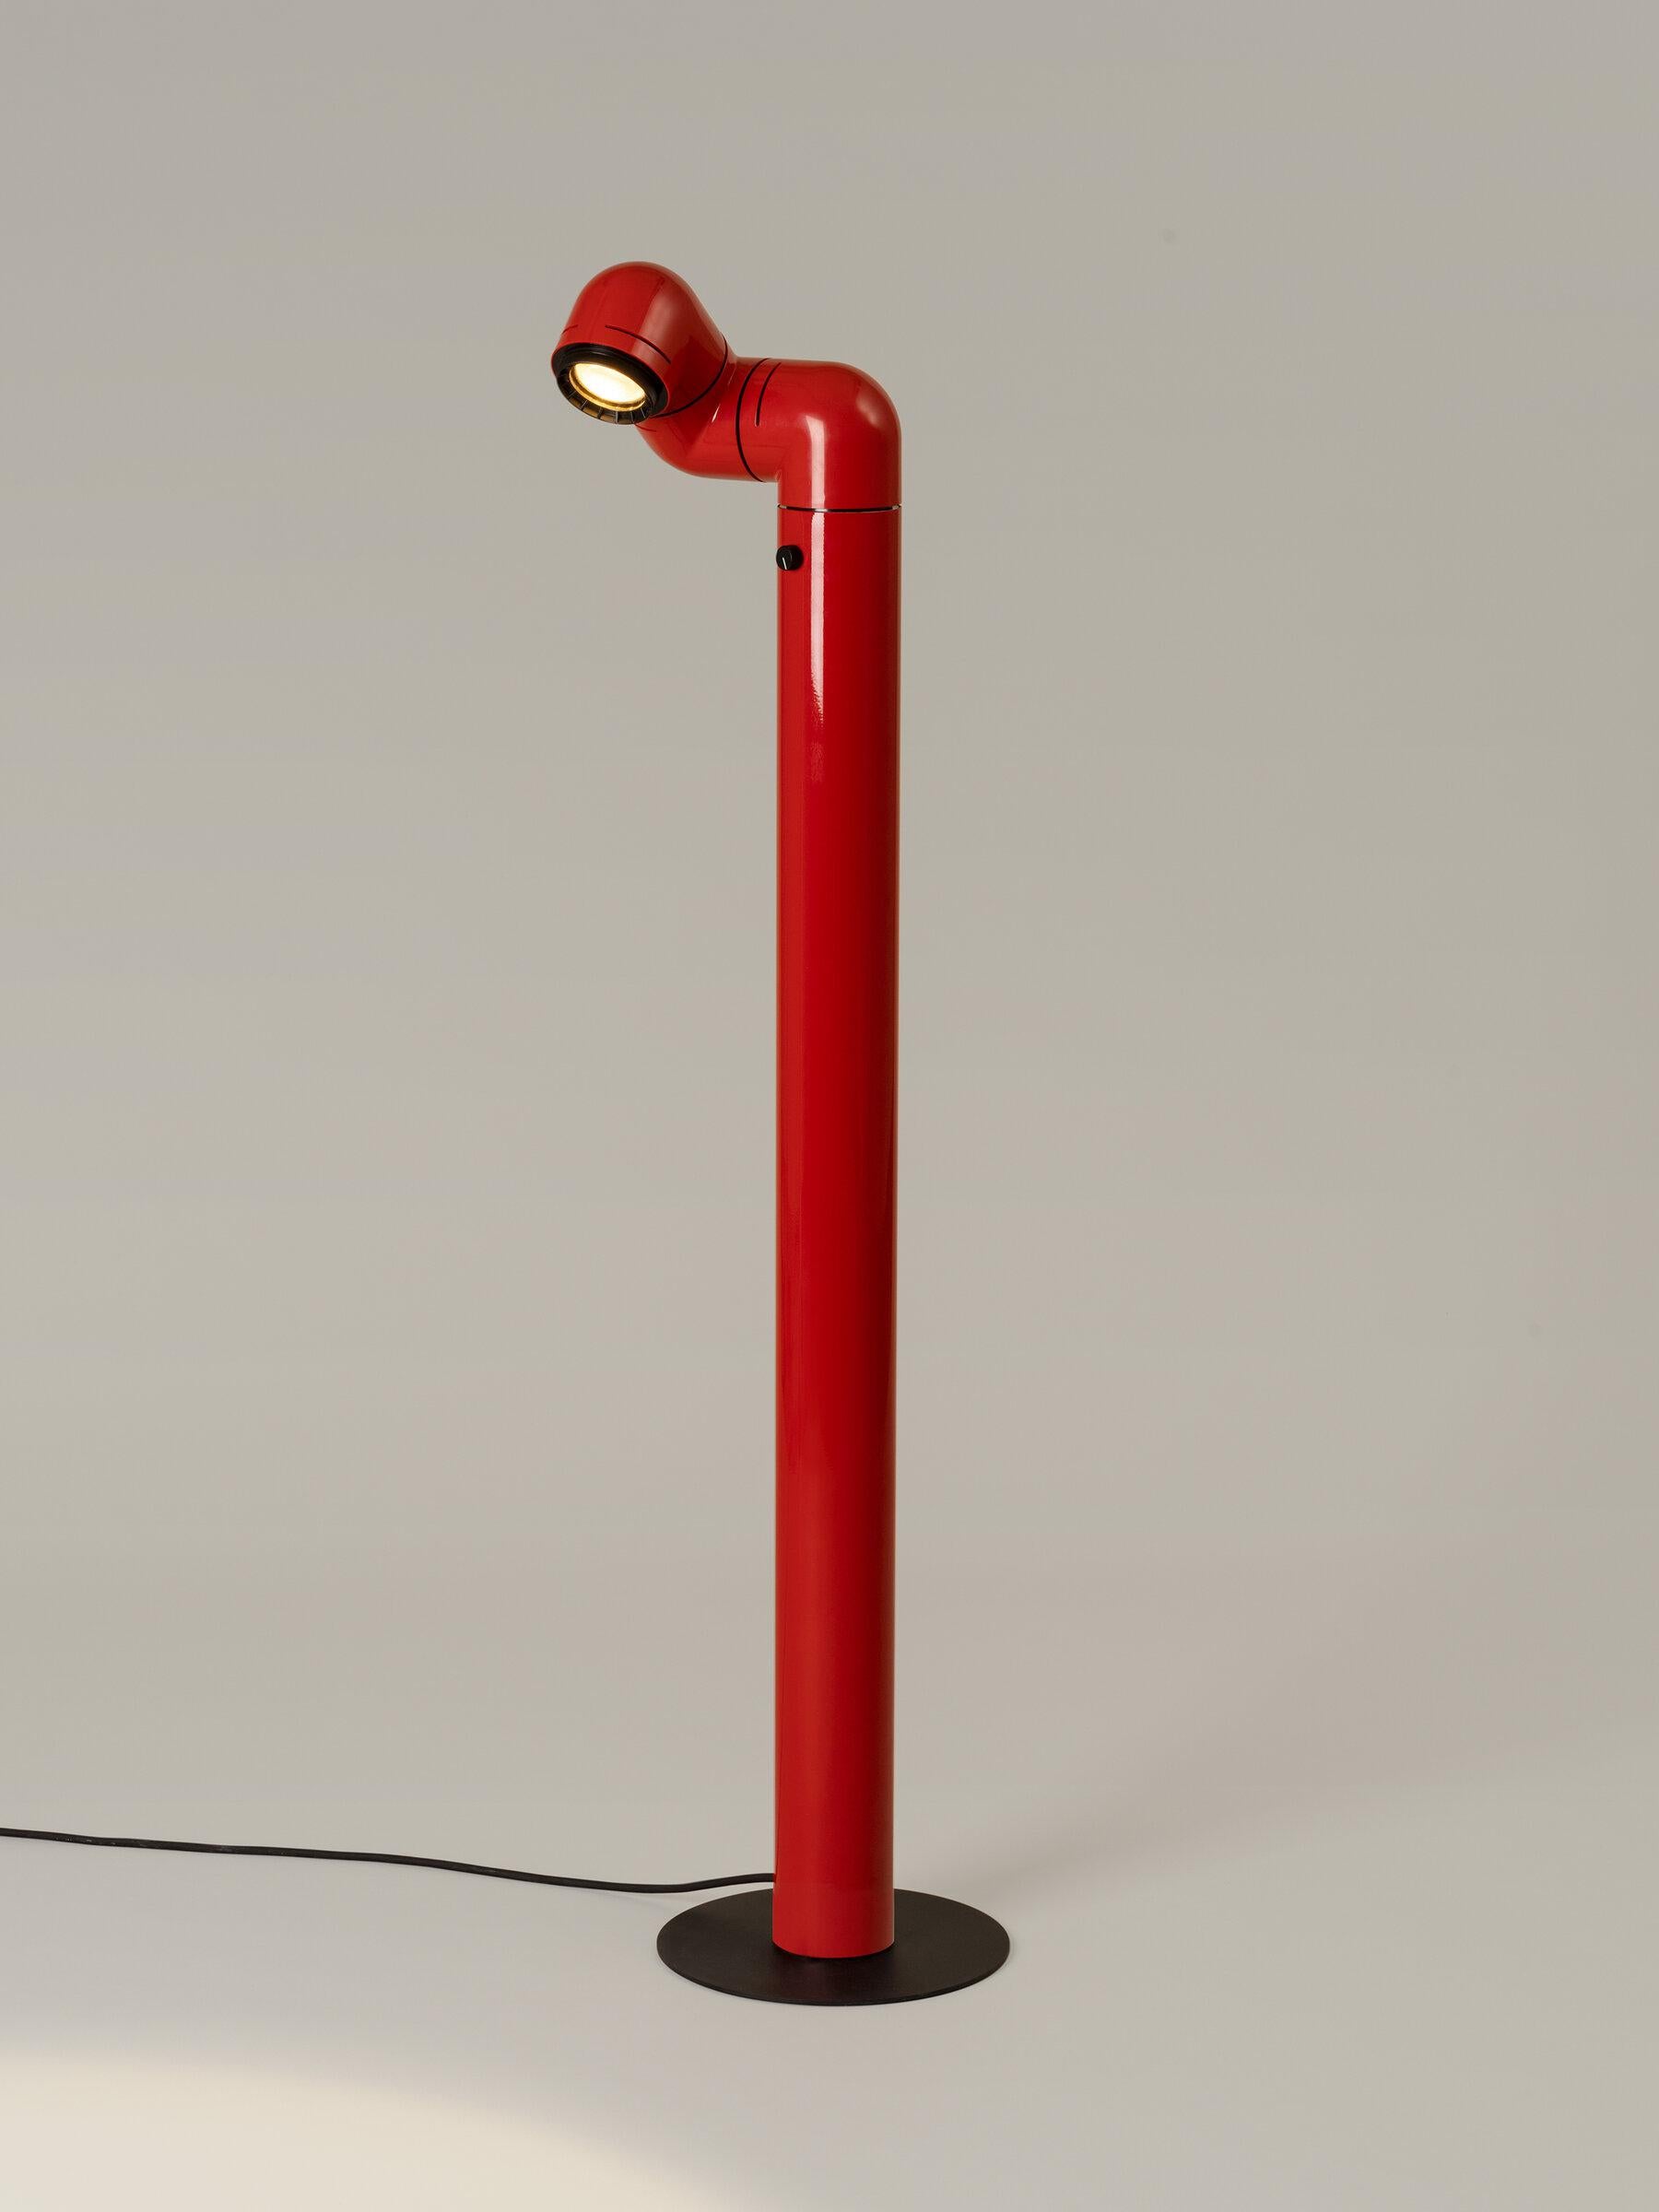 Red Tatu floor lamp by André Ricard
Dimensions: D 23 x W 26 x H 116 cm
Materials: Metal, plastic.
Available in red or white.

This friendly lamp, a revolutionary milestone in design, is essential in any context, directing light wherever it is